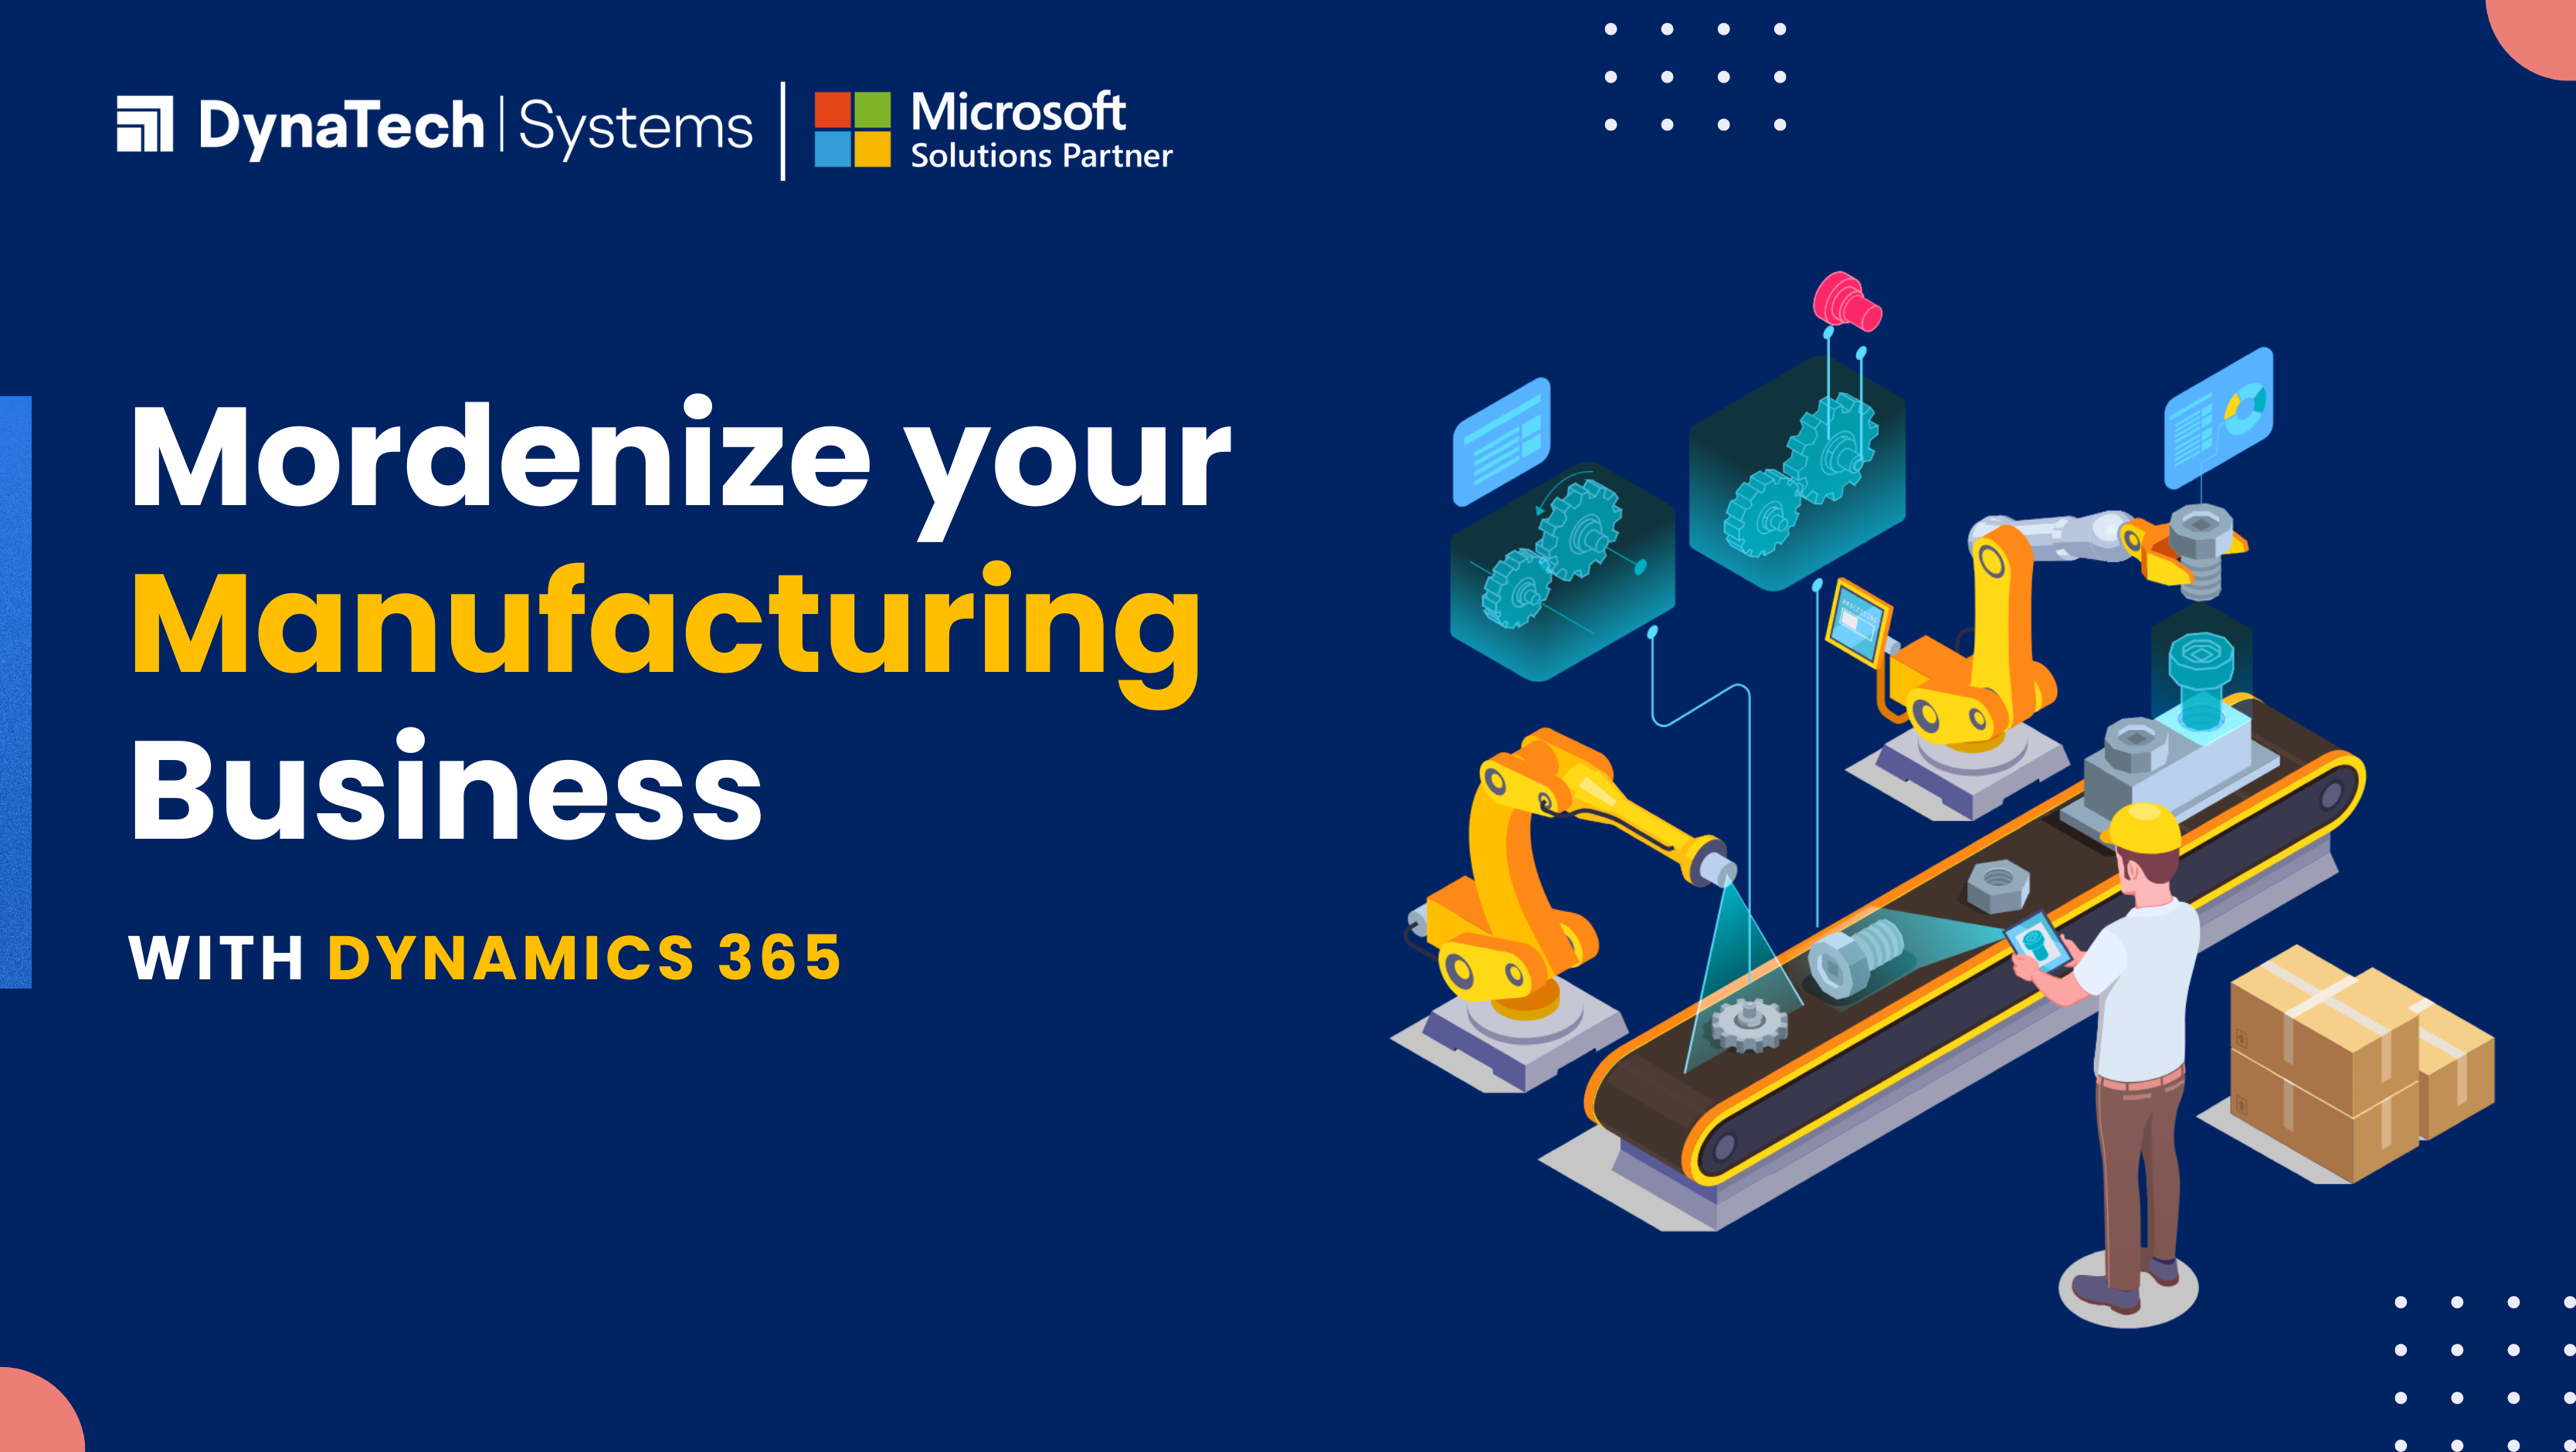 Reform your manufacturing business with Dynamics 365